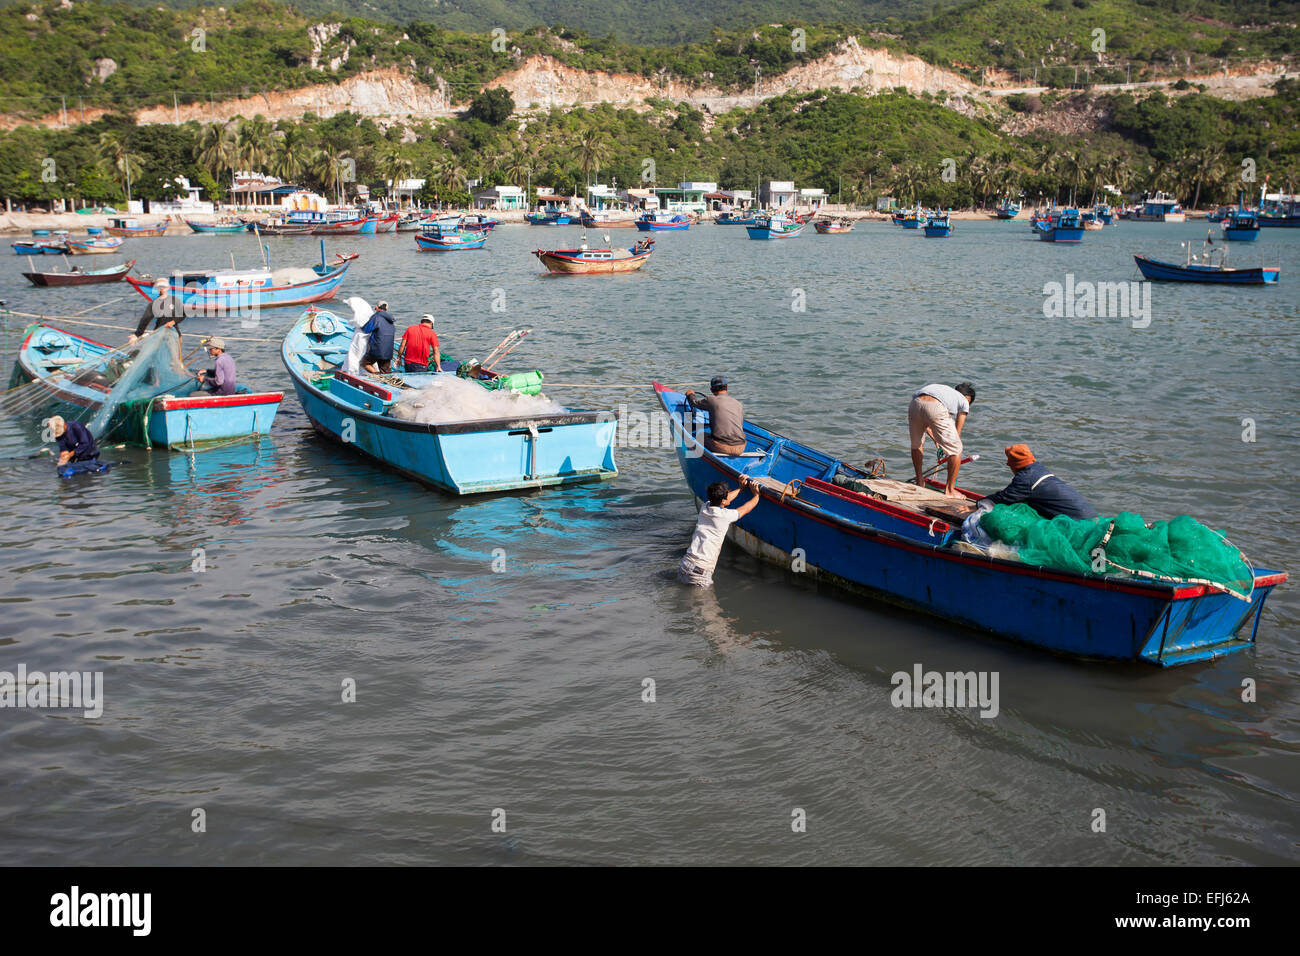 Fishermen in their fishing boats unloading their catch, Vinh Hy Bay, South China Sea, Vietnam Stock Photo